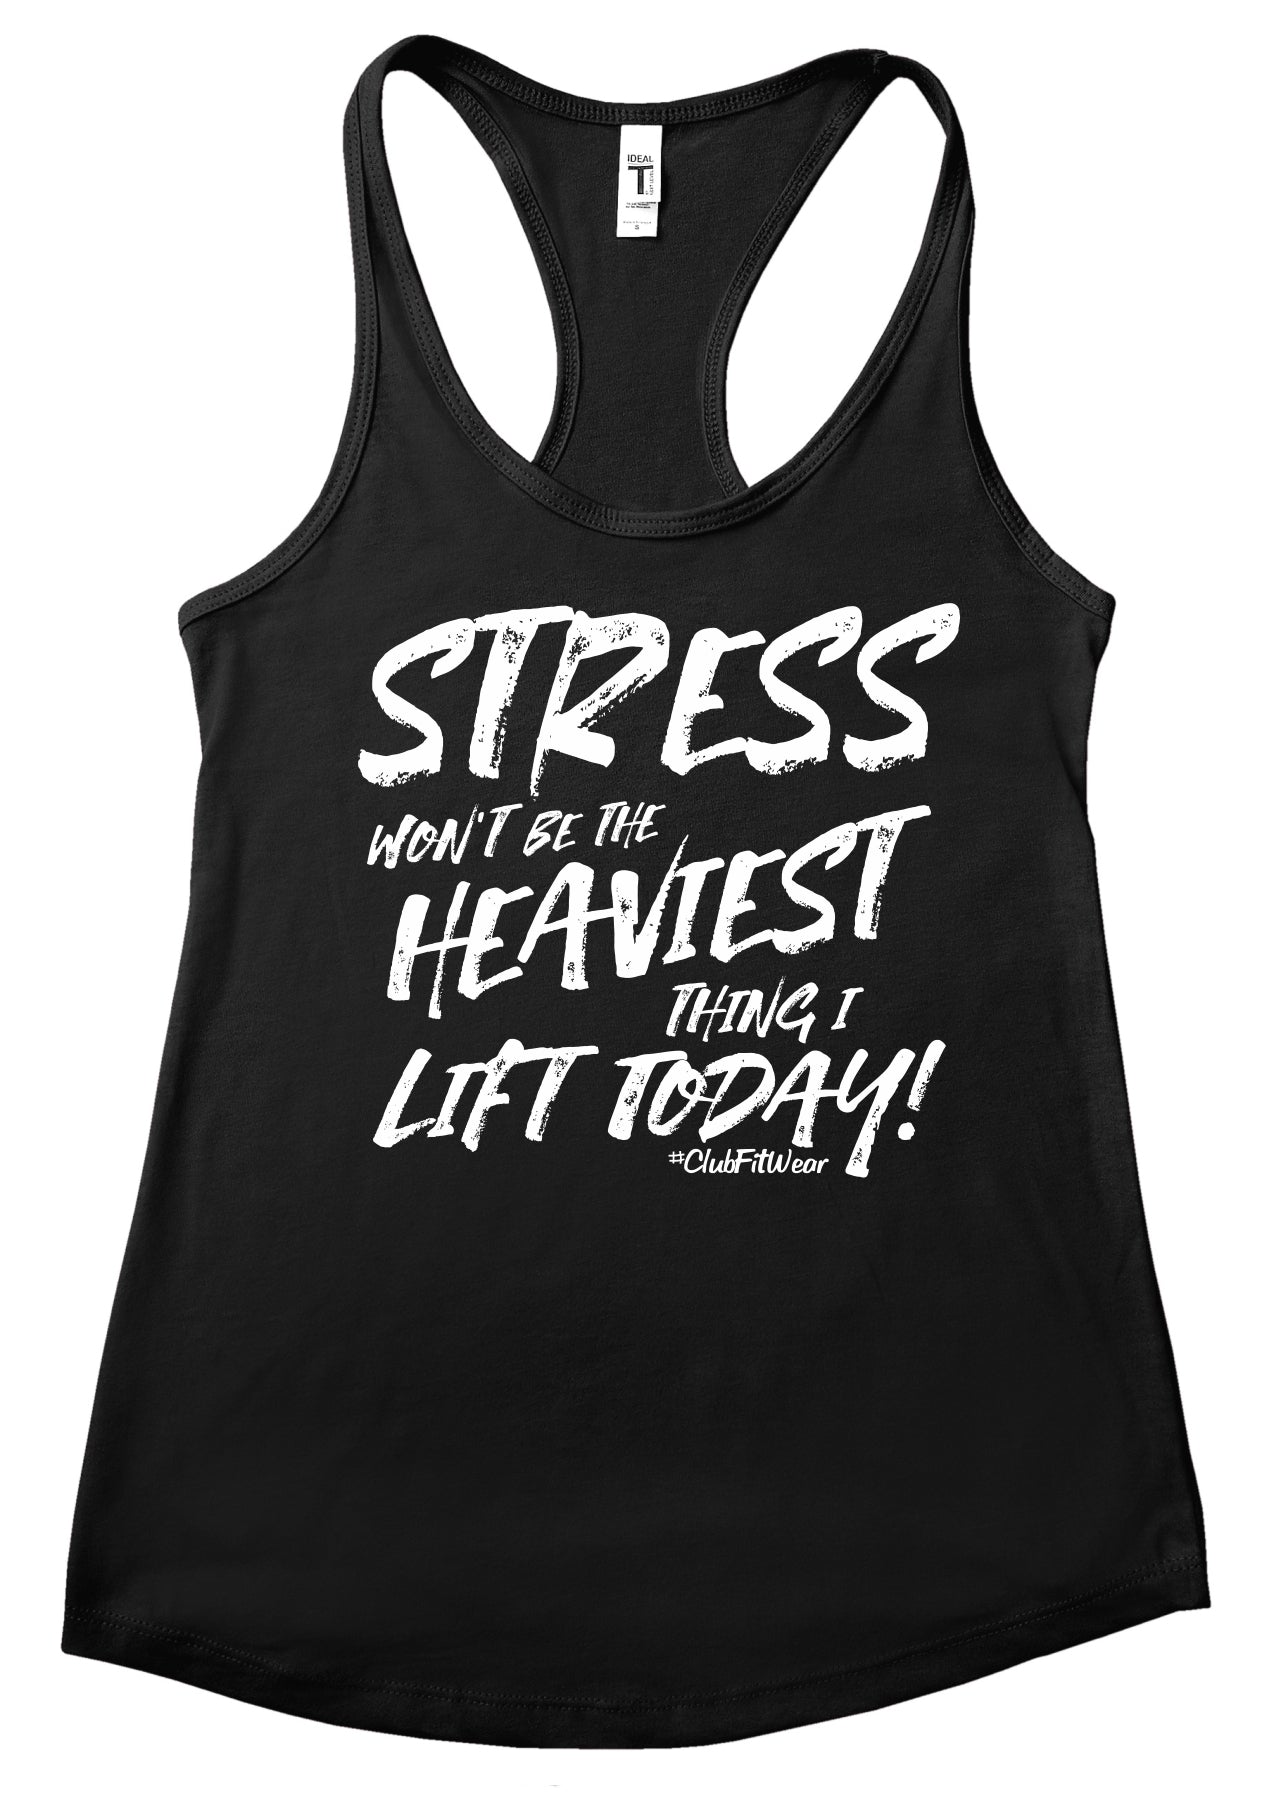 Stress won't be the Heaviest Thing I Lift Today